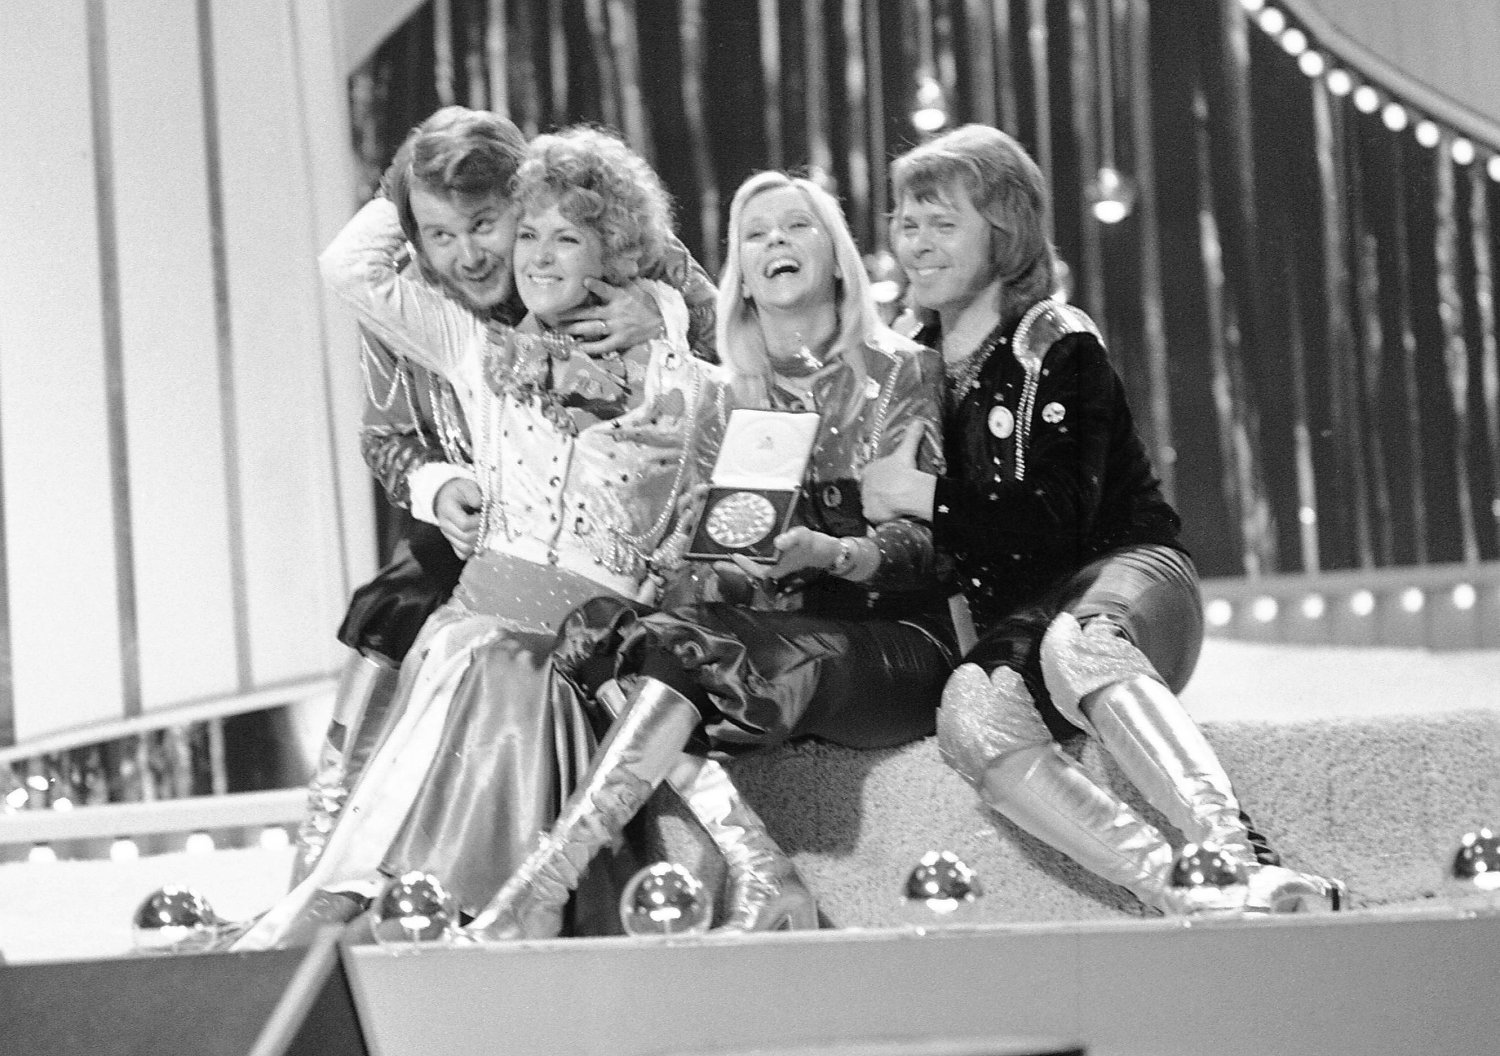 FILE - Swedish pop group ABBA celebrate winning the 1974 Eurovision Song Contest on stage at the Brighton Dome in England with their song Waterloo, April 6, 1974. (AP Photo/Robert Dear, File)